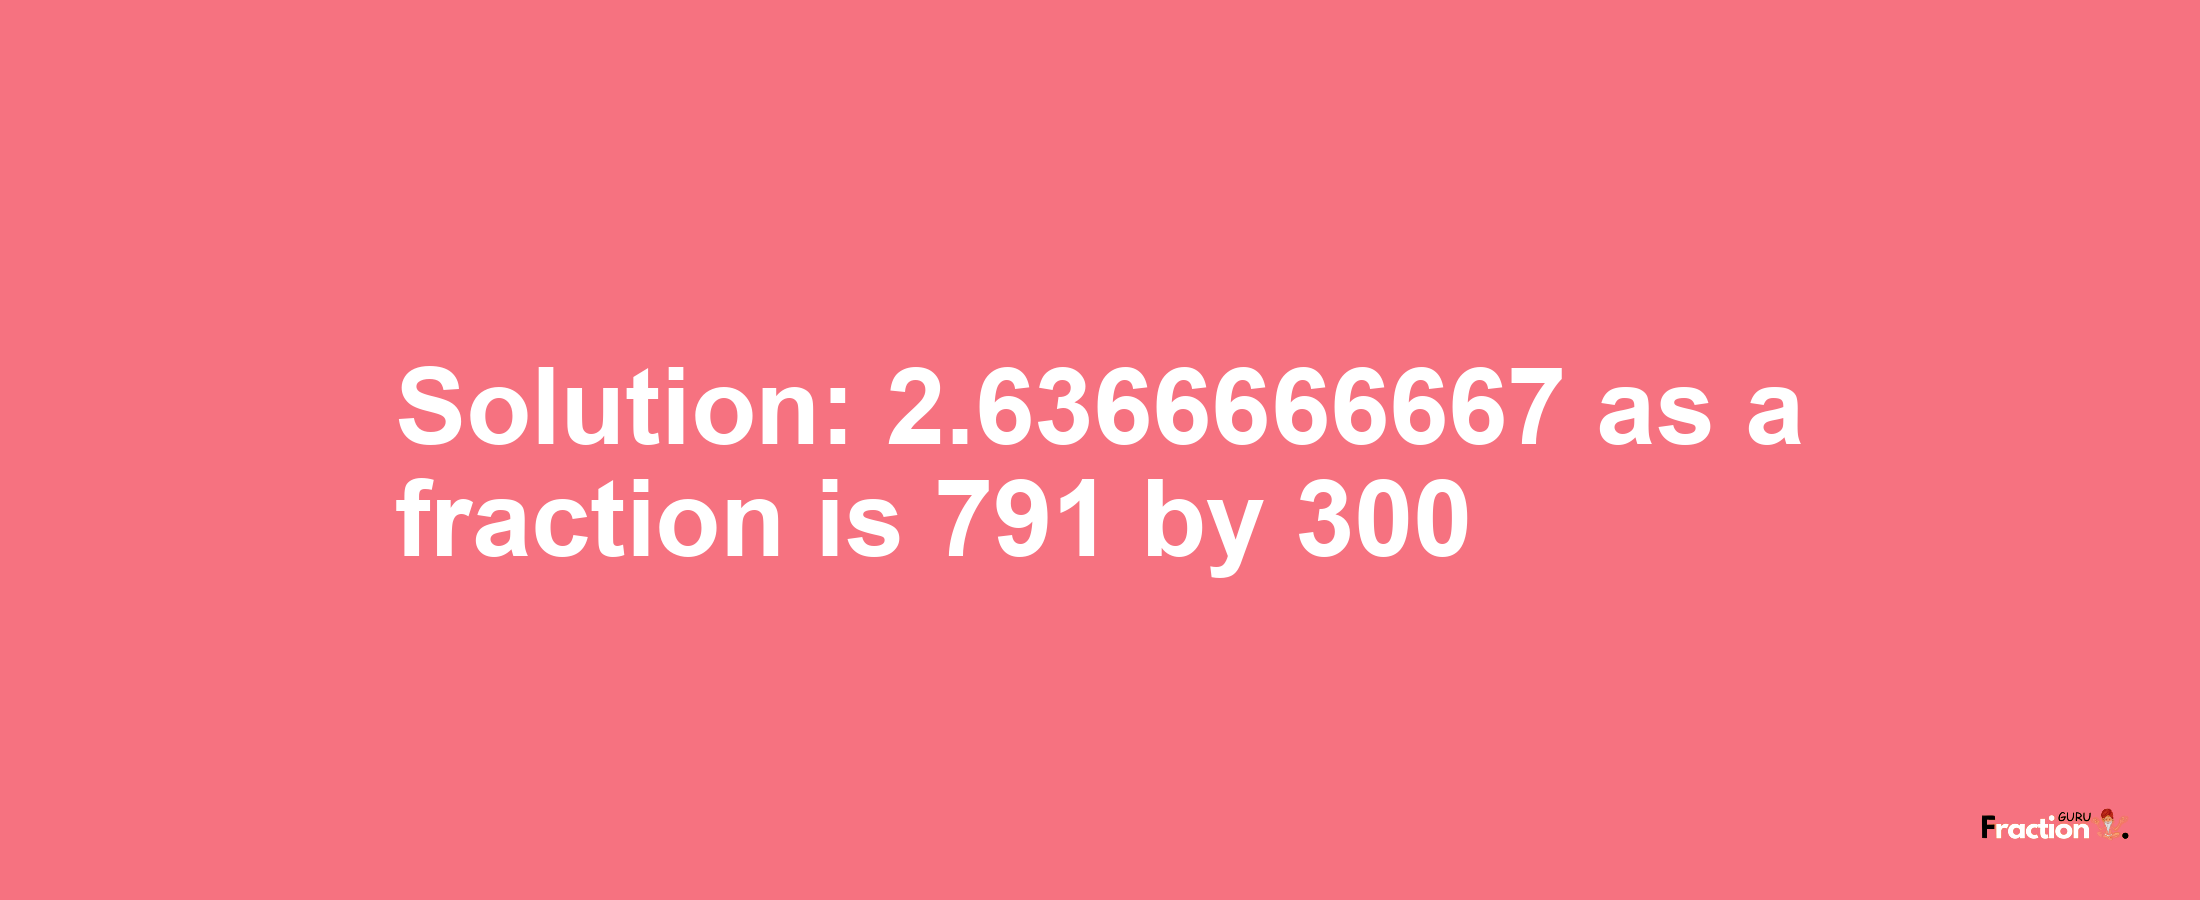 Solution:2.6366666667 as a fraction is 791/300